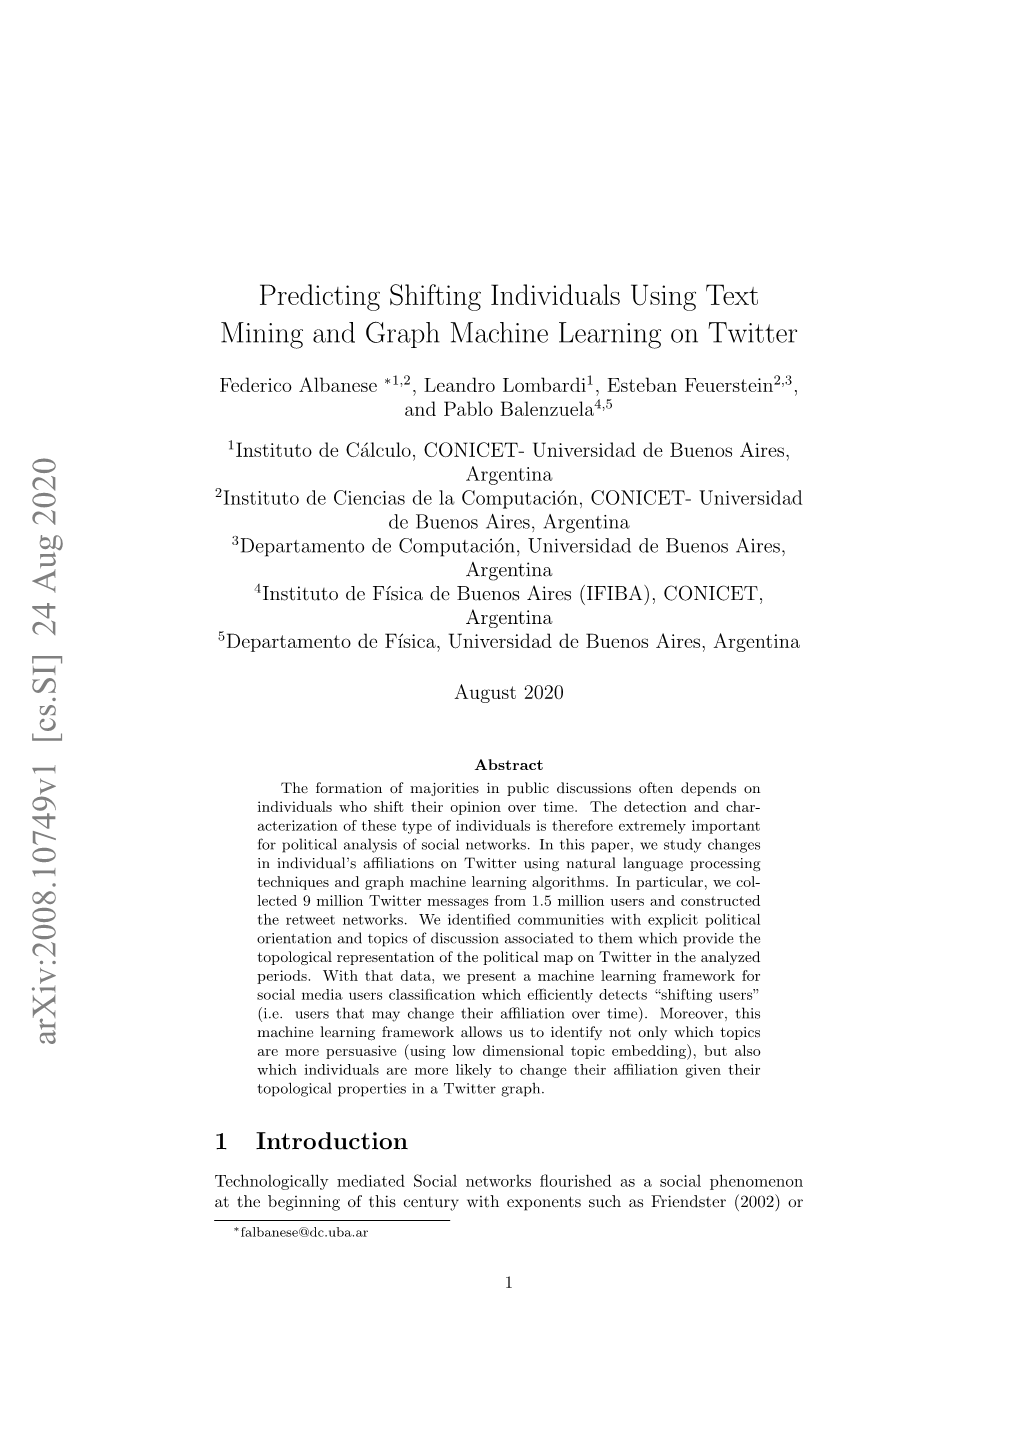 Predicting Shifting Individuals Using Text Mining and Graph Machine Learning on Twitter